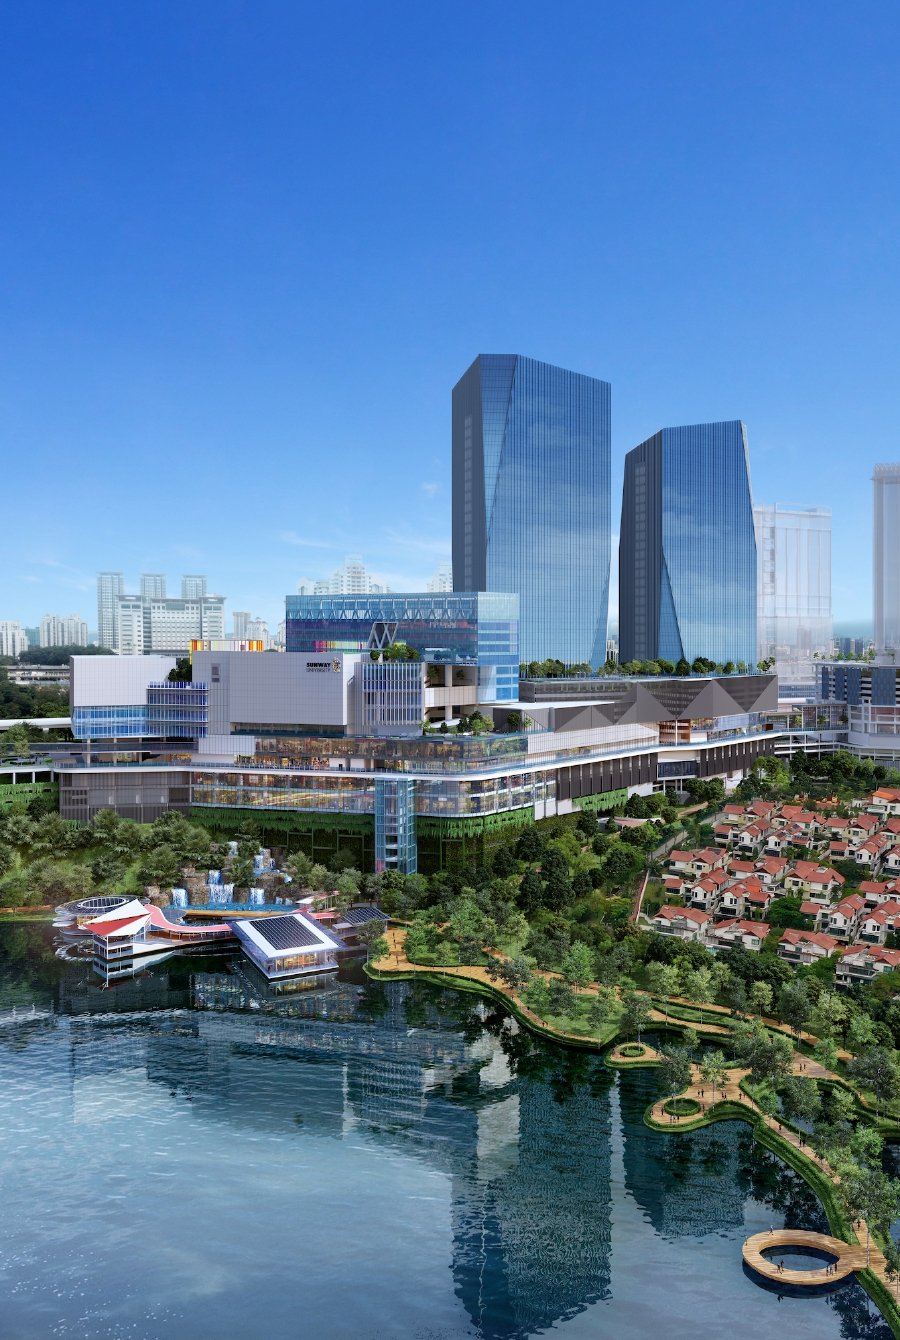 ENGIE-SUNWAY DCS Sdn Bhd will install the district cooling system at the Sunway South Quay CP2 mixed-use development.